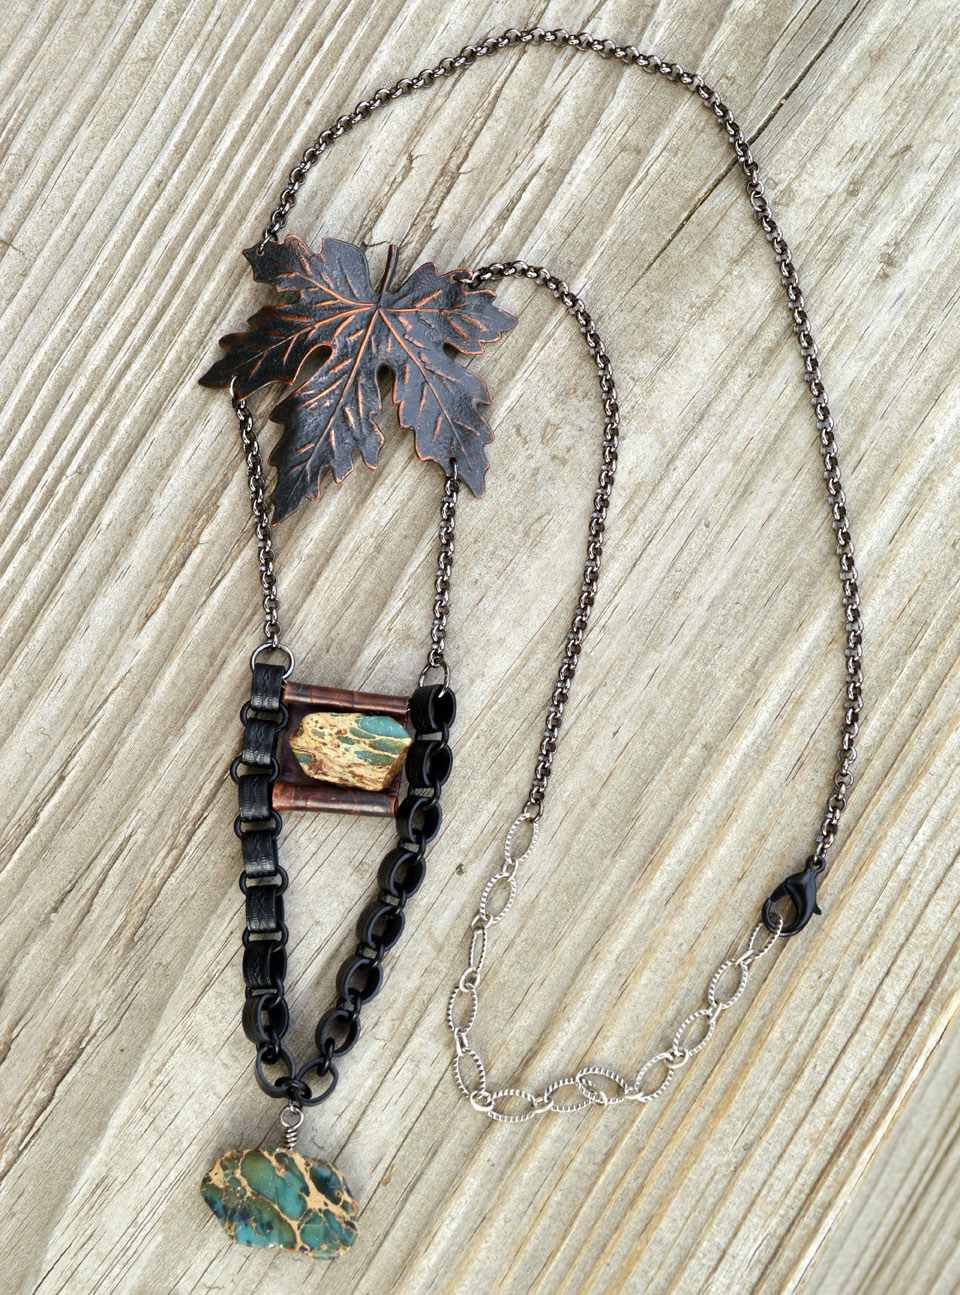 Artisan Jewelry Statement Pendant Necklace Blue Stone Leaf Mixed Metal